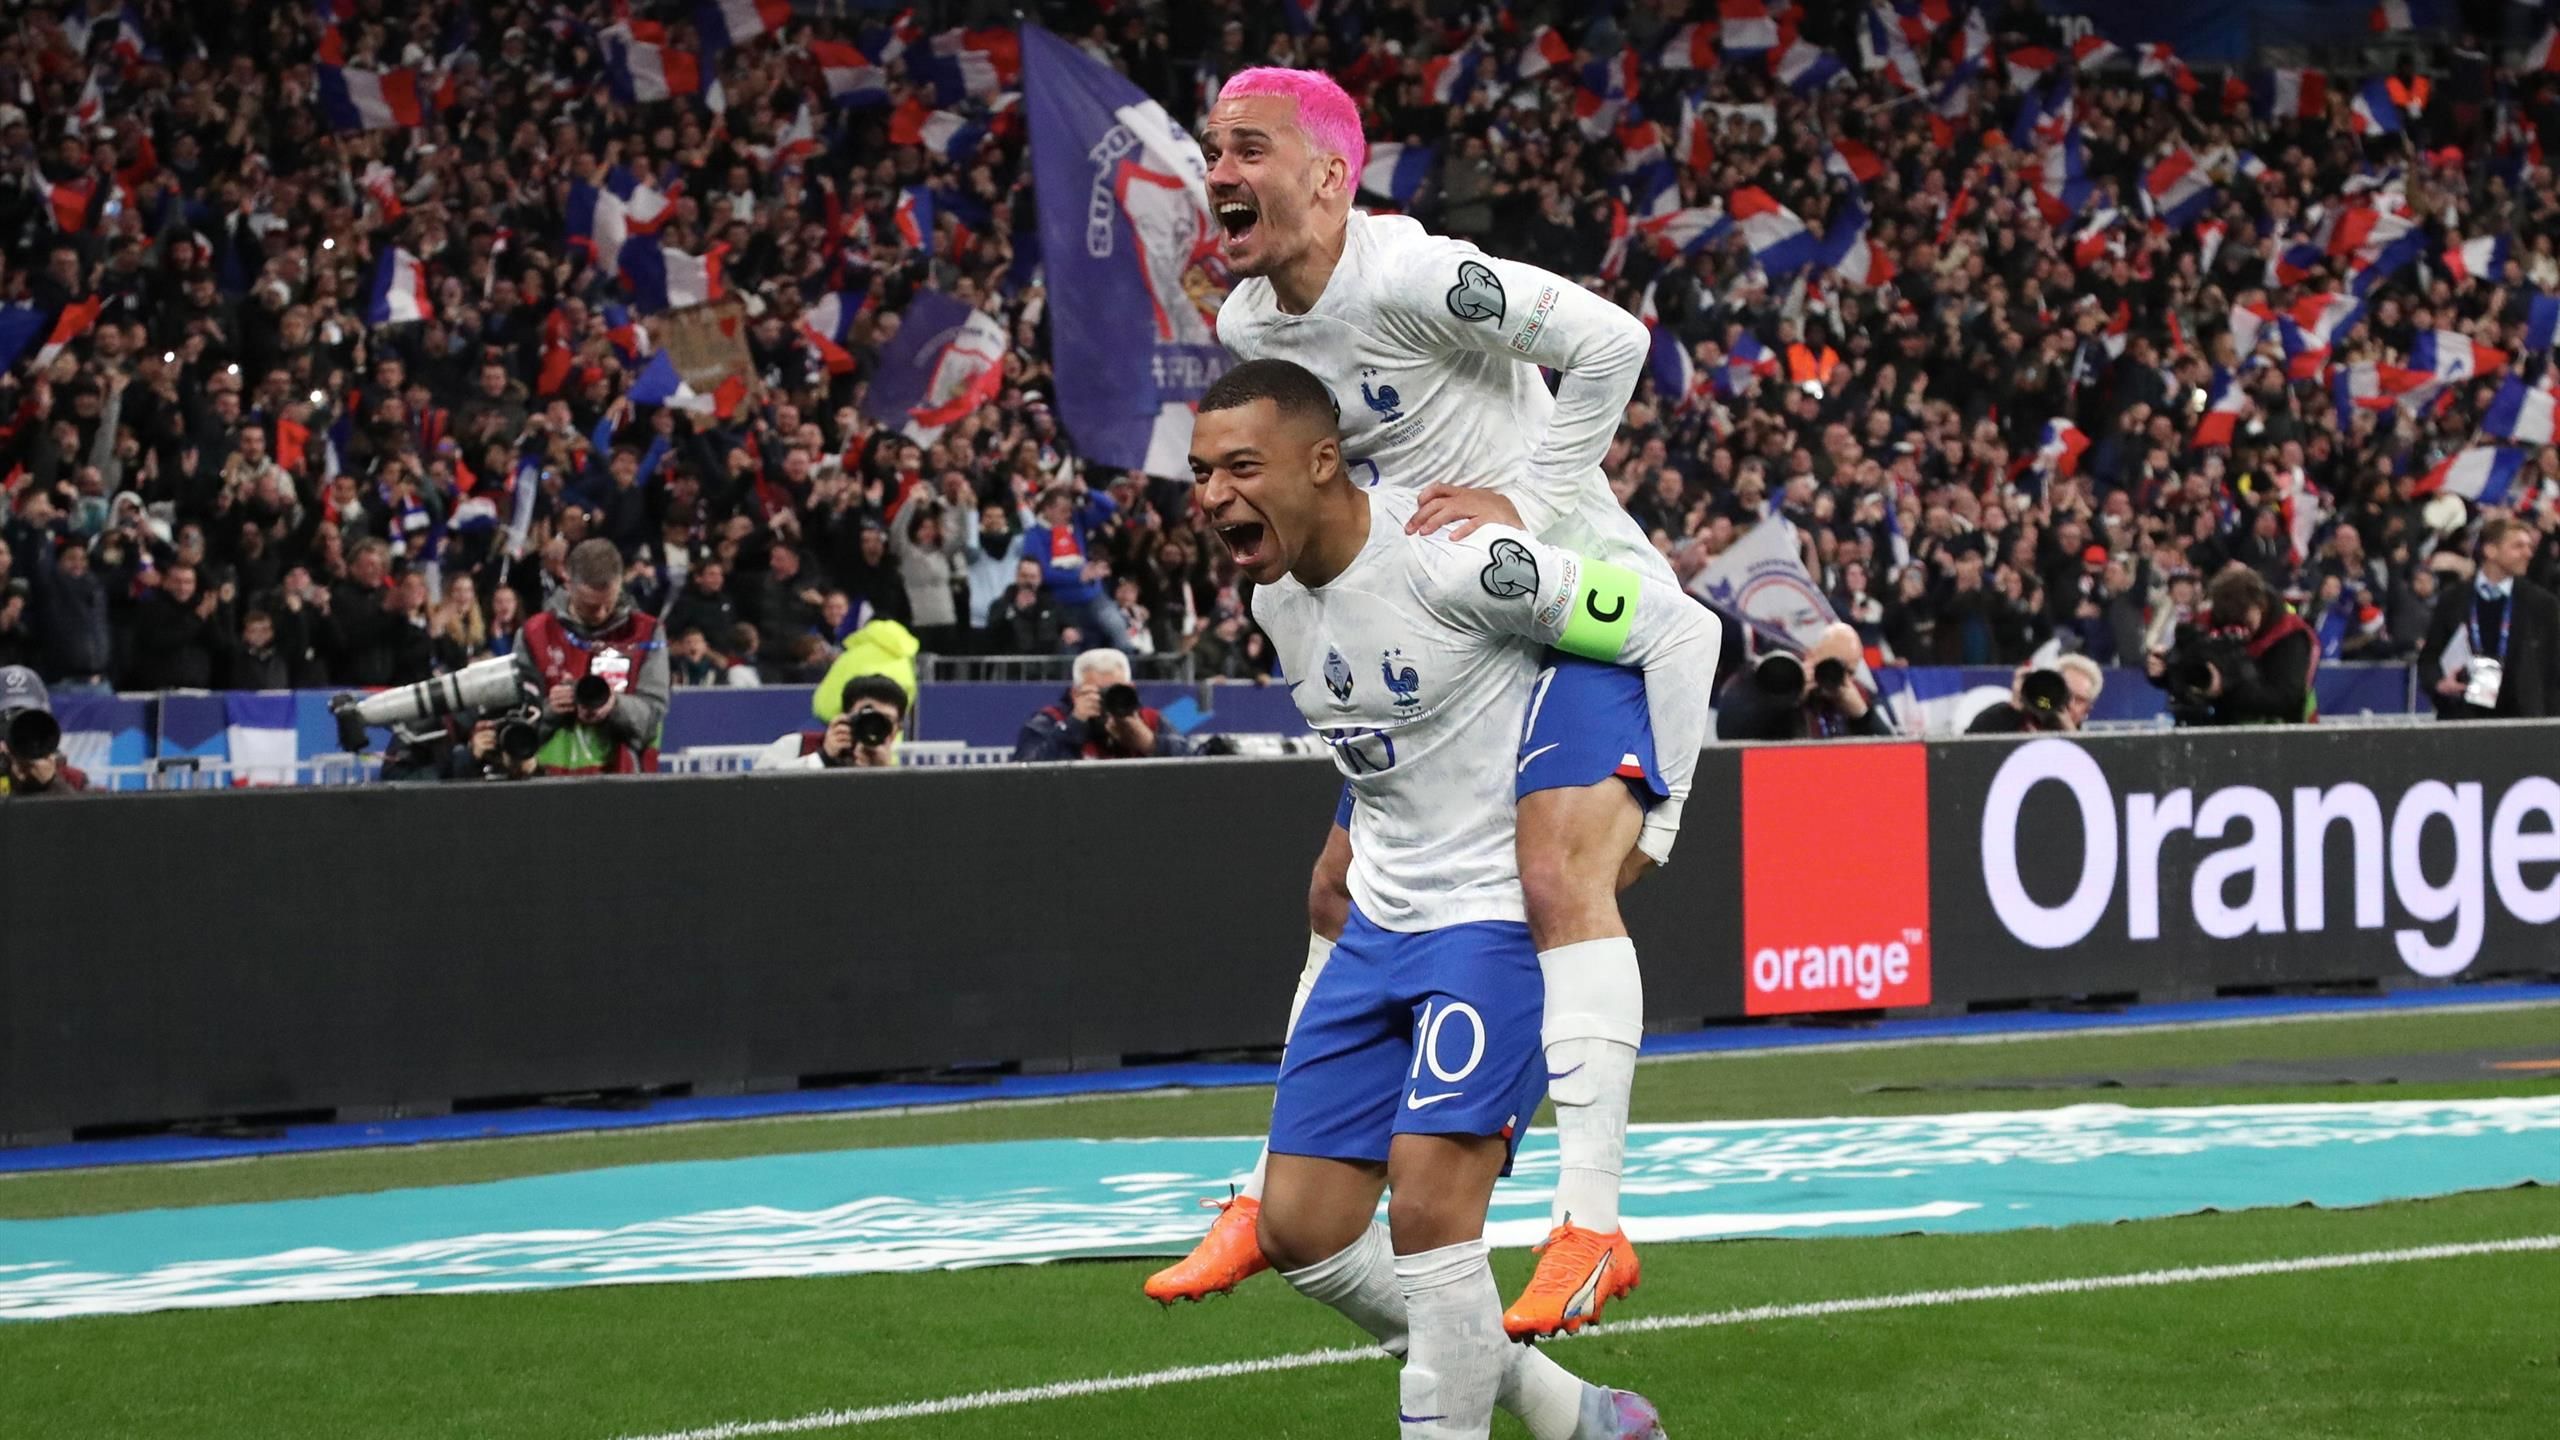 France 40 Netherlands Kylian Mbappe leads Les Bleus to easy win in